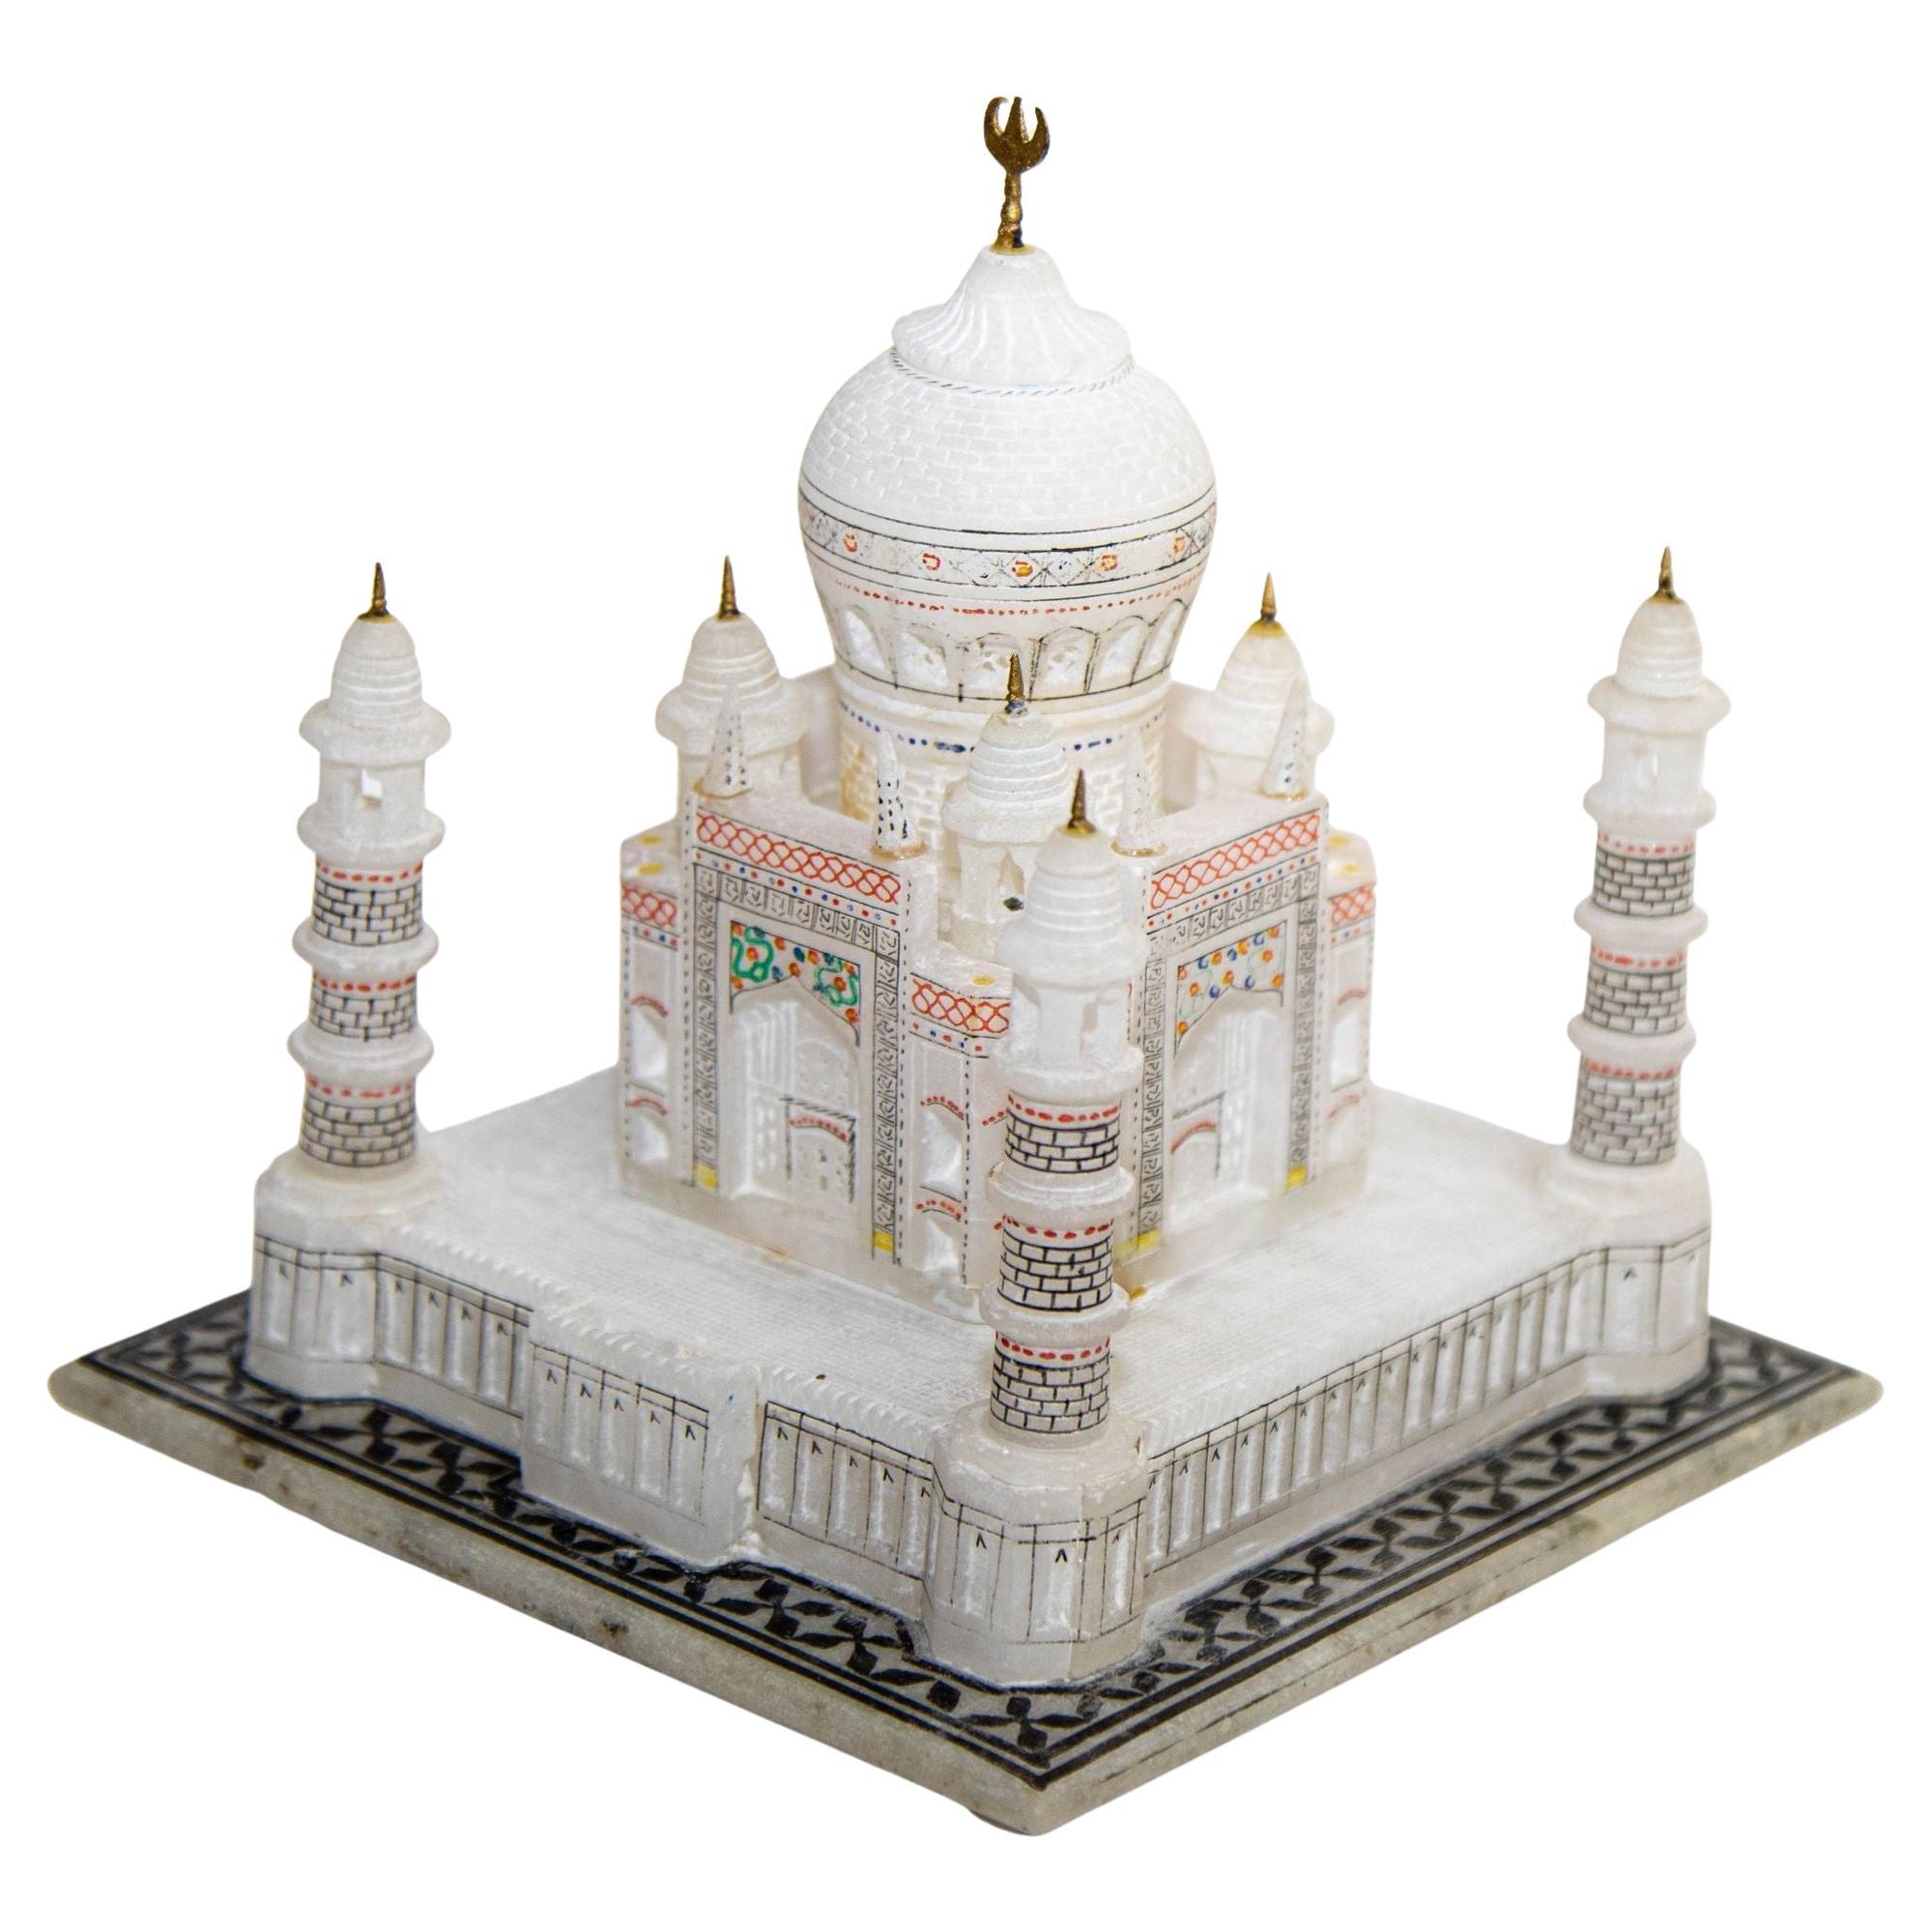 Taj Mahal White Marble Hand-Crafted Collectible Miniature Model